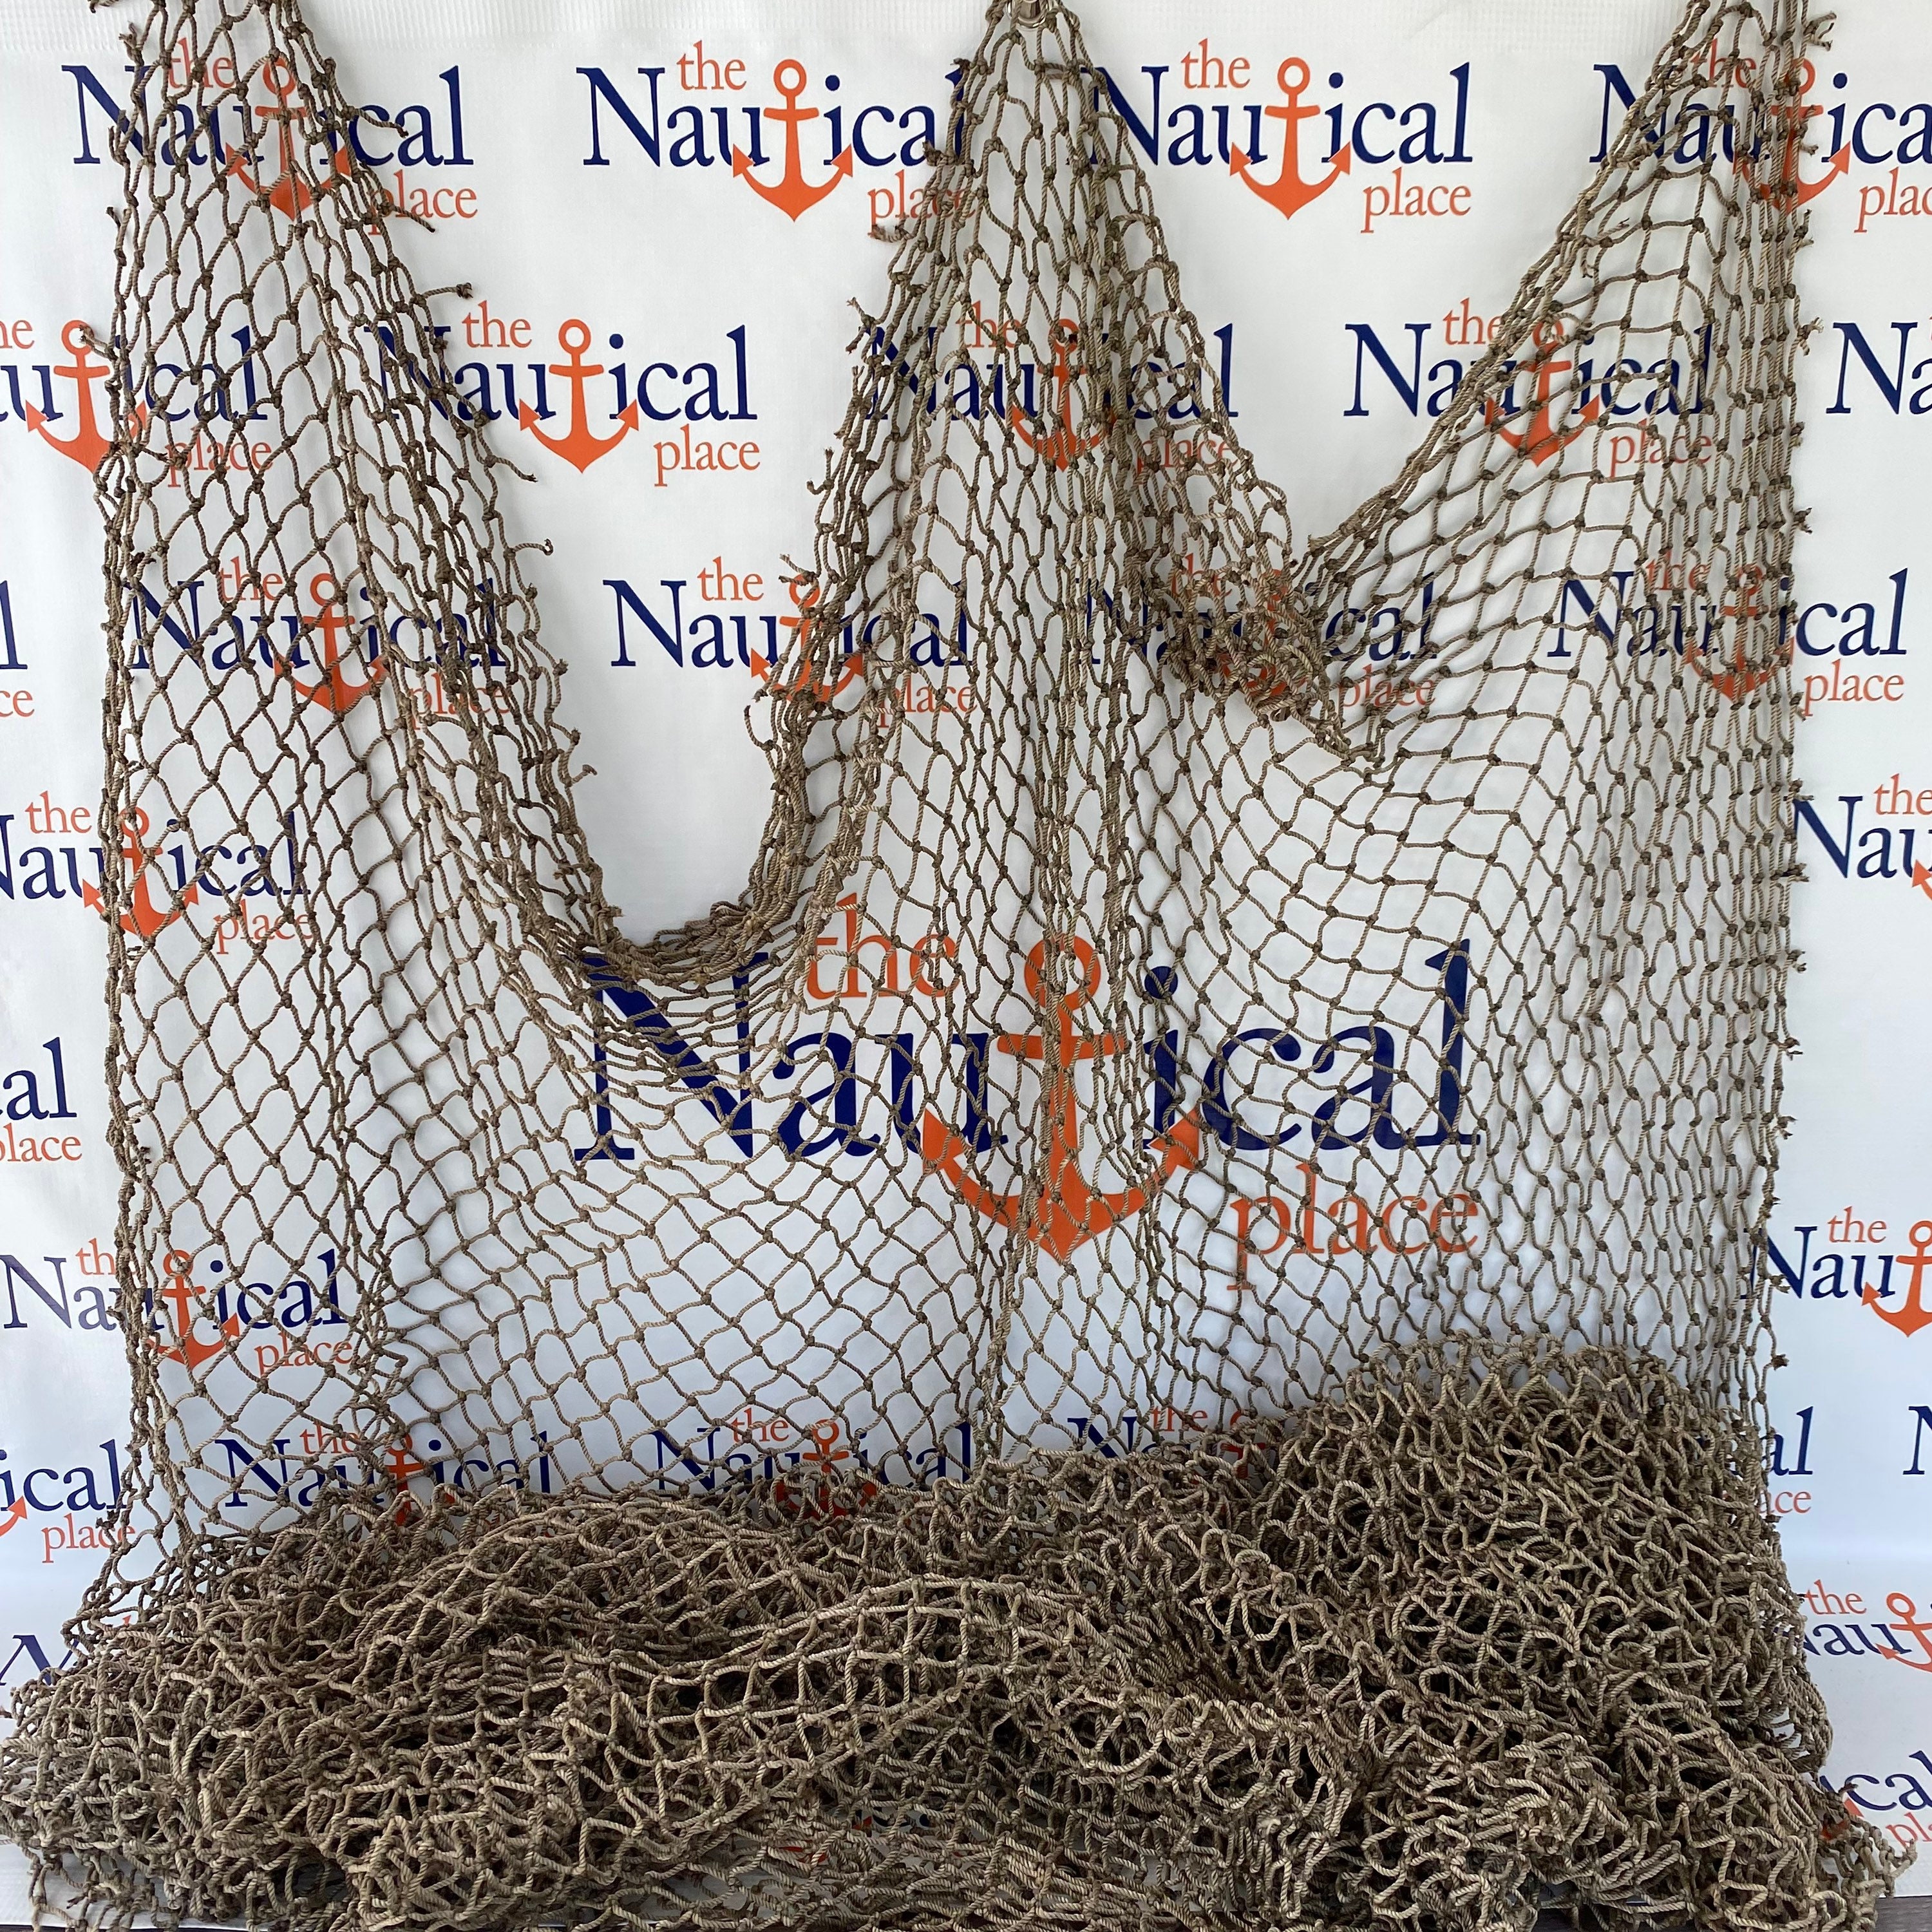 Authentic Fishing Net - 5 ft x 10 ft HEAVY Knotted - Commercial Fish Netting  - Vintage Fish Net - Nautical Decor For Tiki Bar